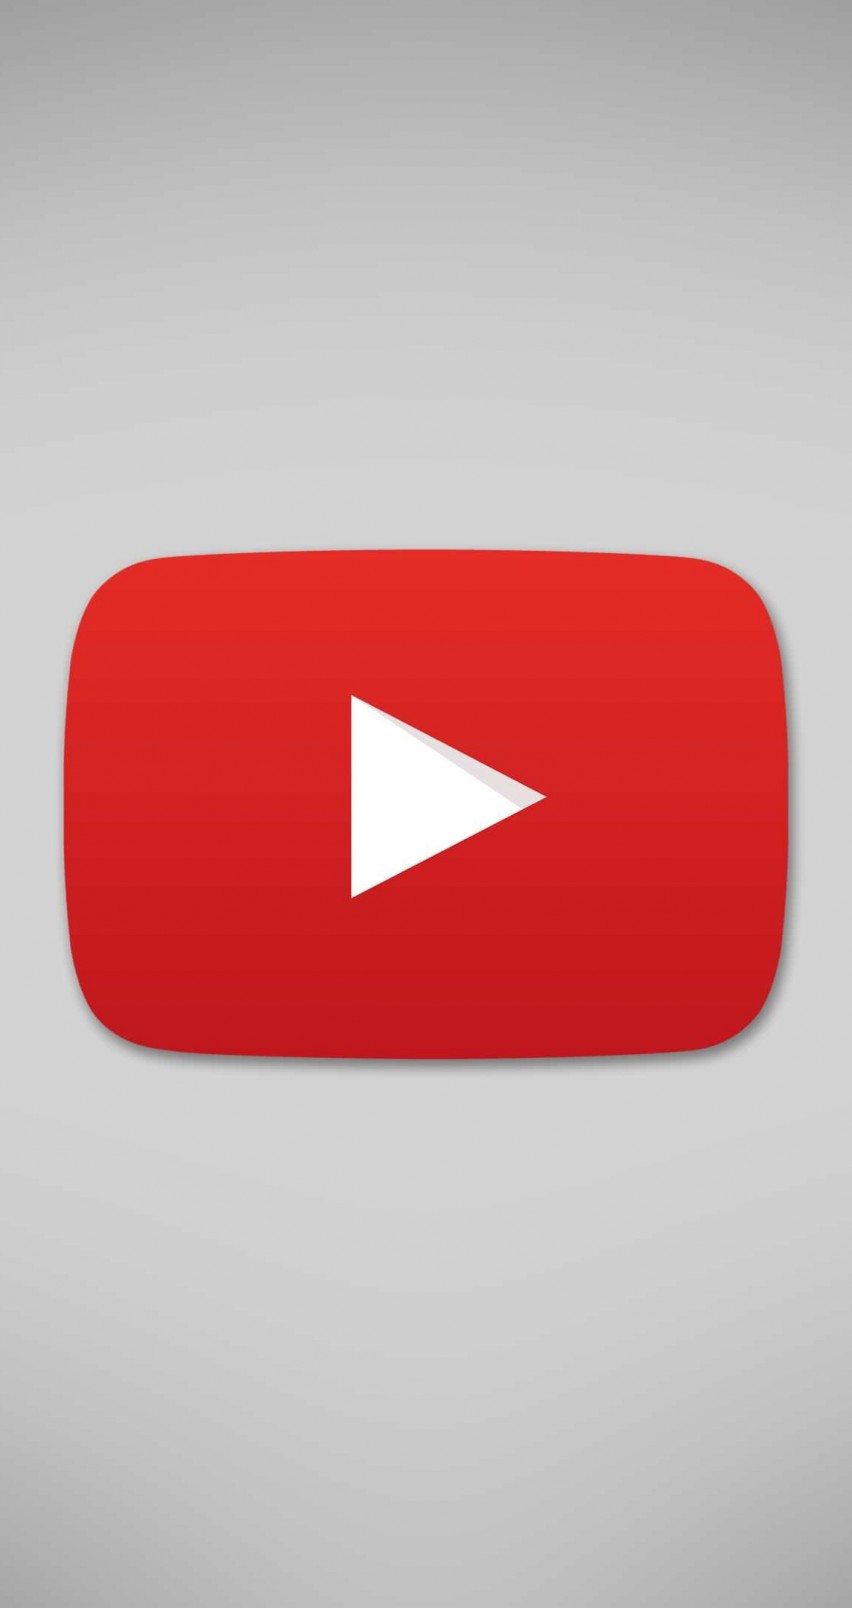 Download YouTube Logo HD wallpaper for iPhone 6 / 6s - HDwallpapers.net